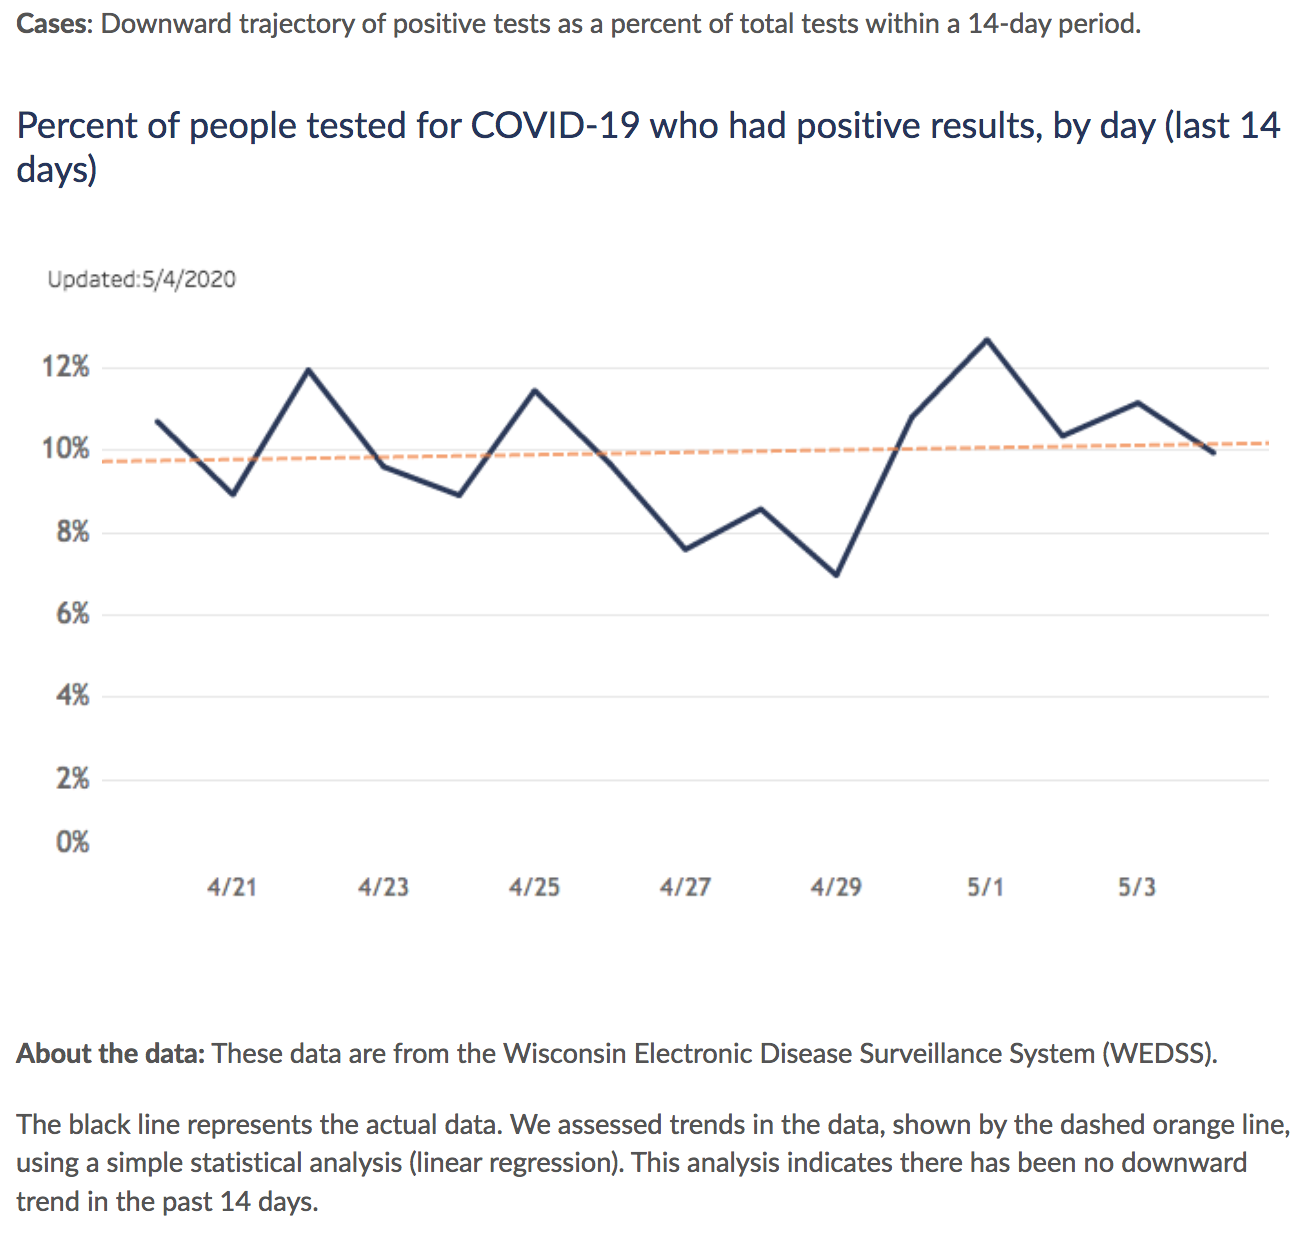 the percent of people tested for COVID-19 who had positive results by day in the last 14 days